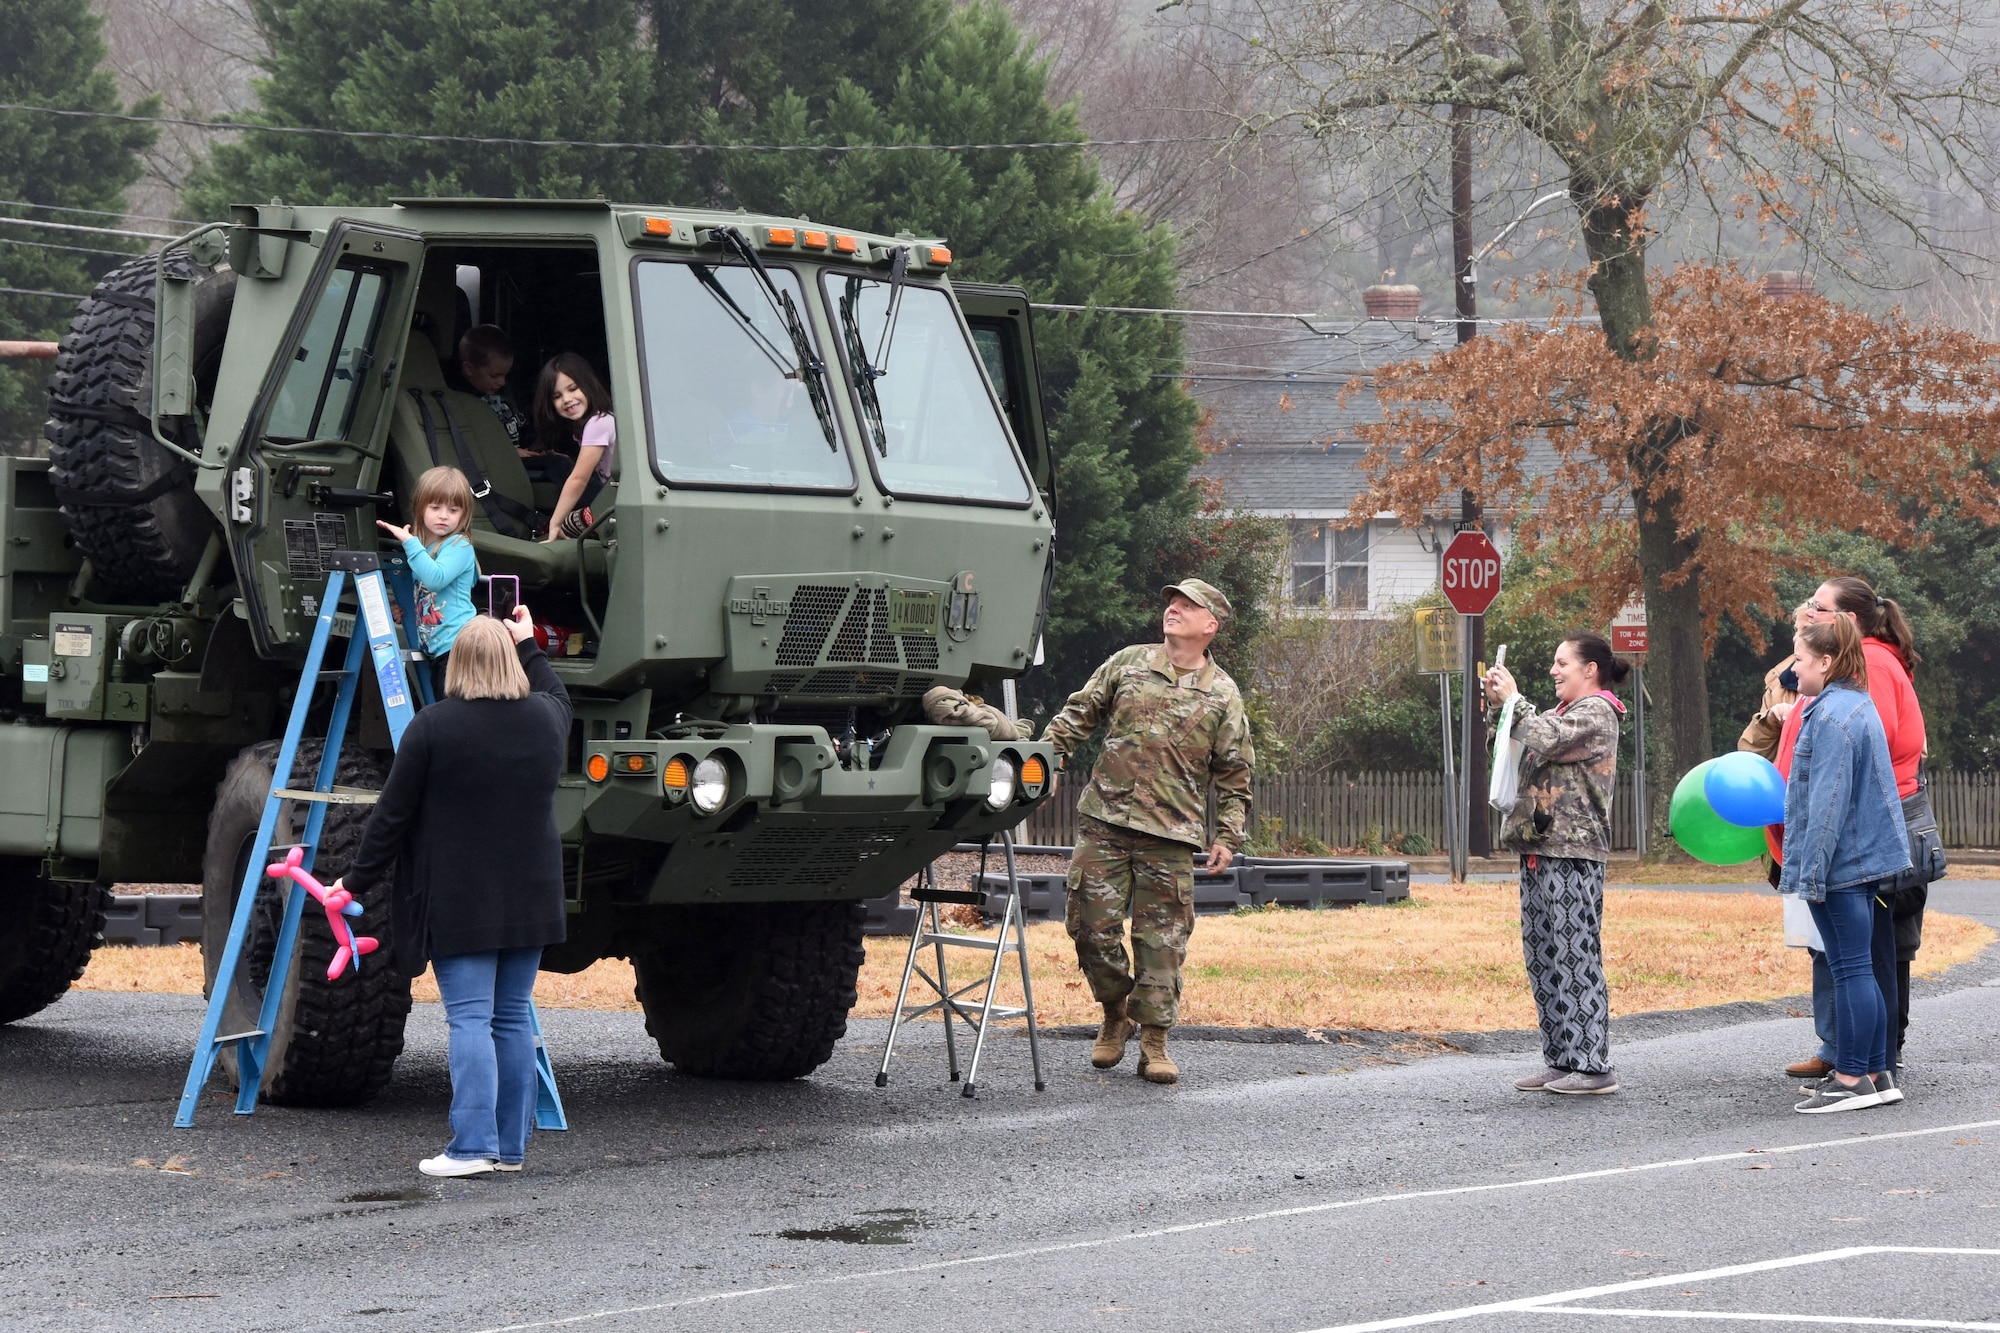 Students of Badin Elementary School (B.E.S.) enjoy climbing into a military vehicle during Operation Santa held at B.E.S., Badin, N.C., Dec. 14th, 2019.  Operation Santa is an annual event run by the Chapter 7 organization of the North Carolina Air National Guard (NCANG) which chooses select schools to provide assistance to families during the holiday season. This year, the NCANG provided presents, lunch, music, bouncy castles and a Santa. The NCANG also partnered with the local Target for food donations.